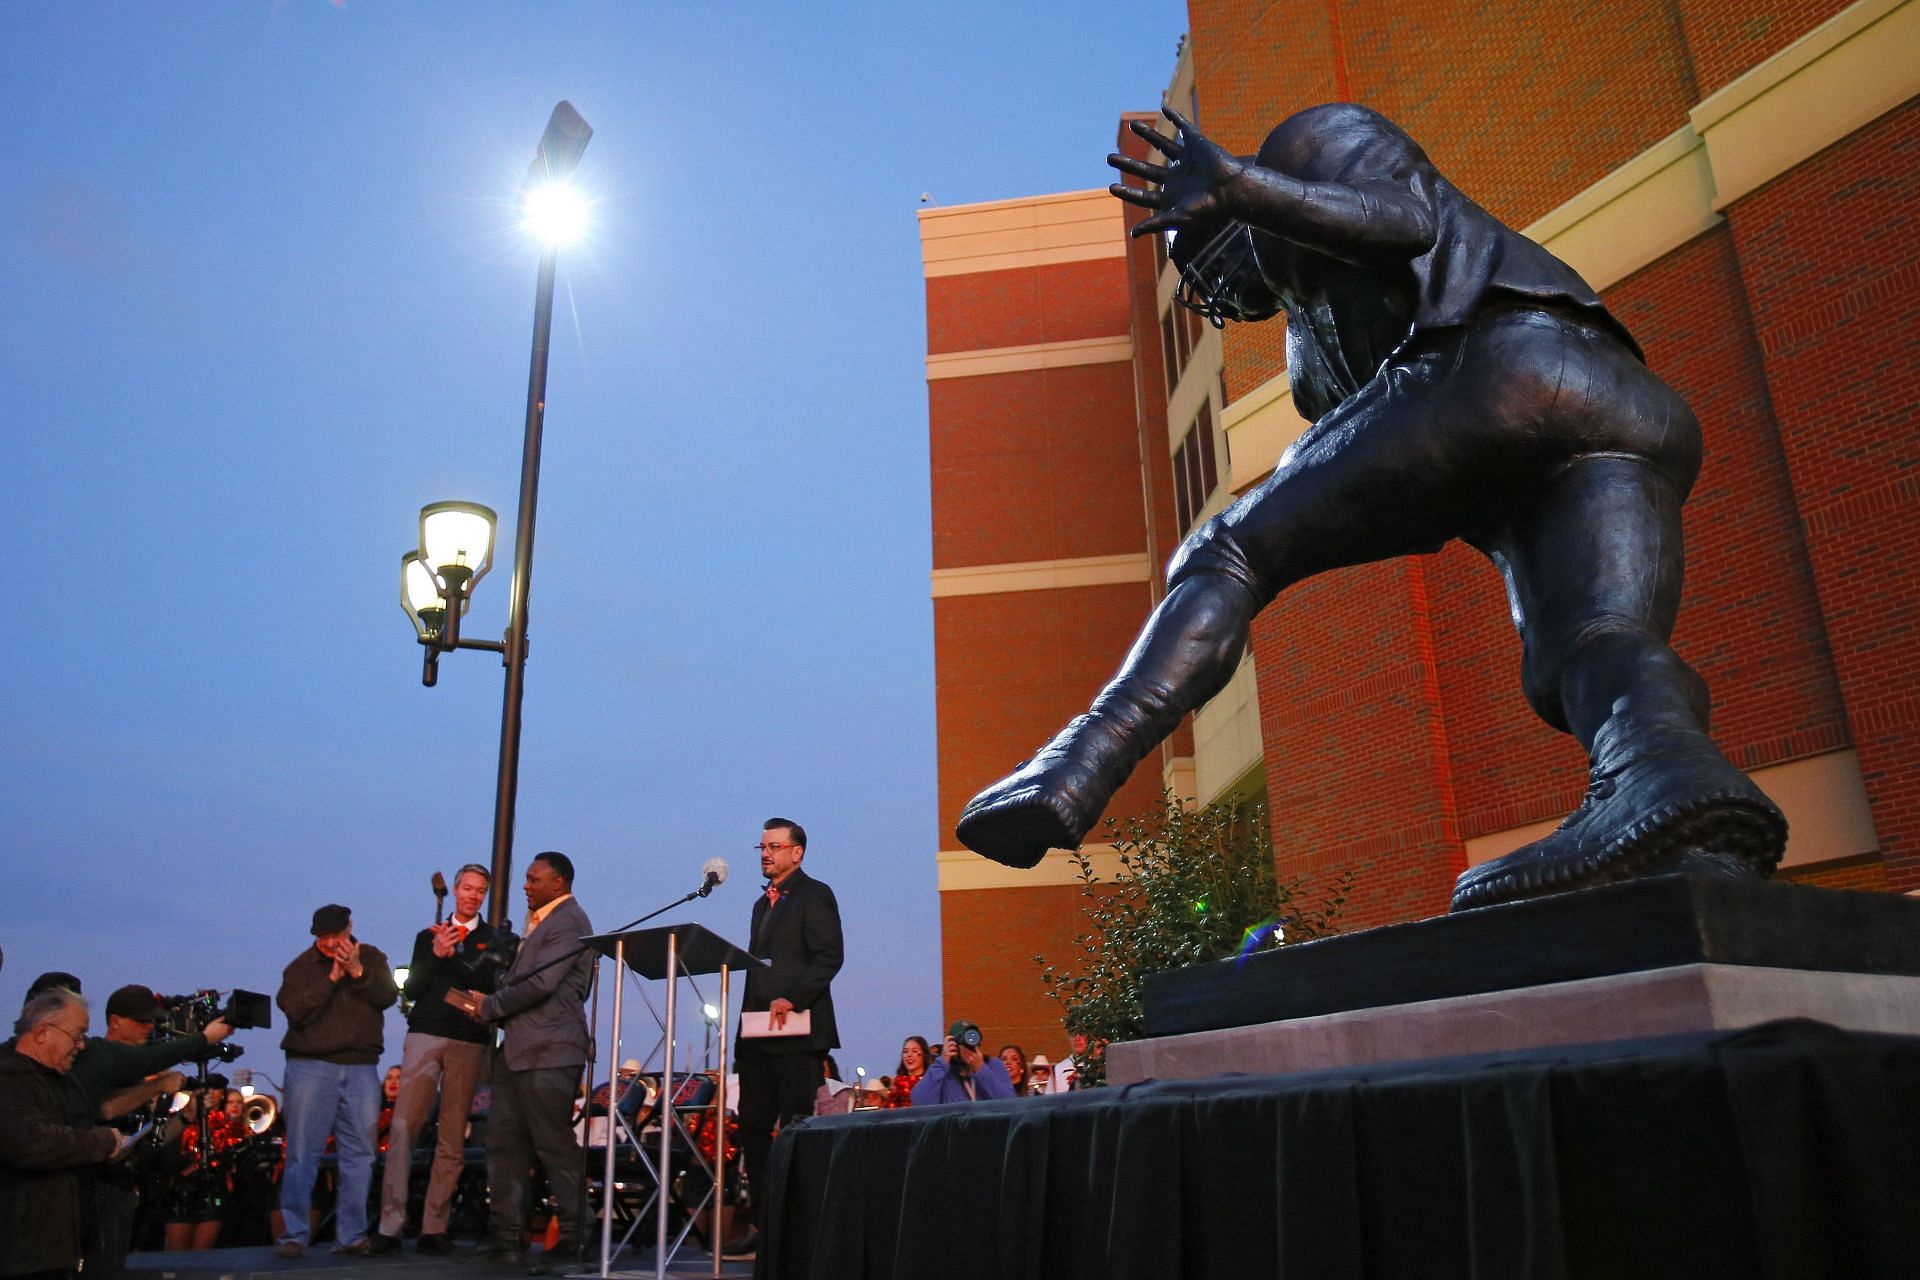 Barry Sanders stands on the podium after a statue was unveiled in his honor by the Oklahoma State Cowboys at Boone Pickens Stadium